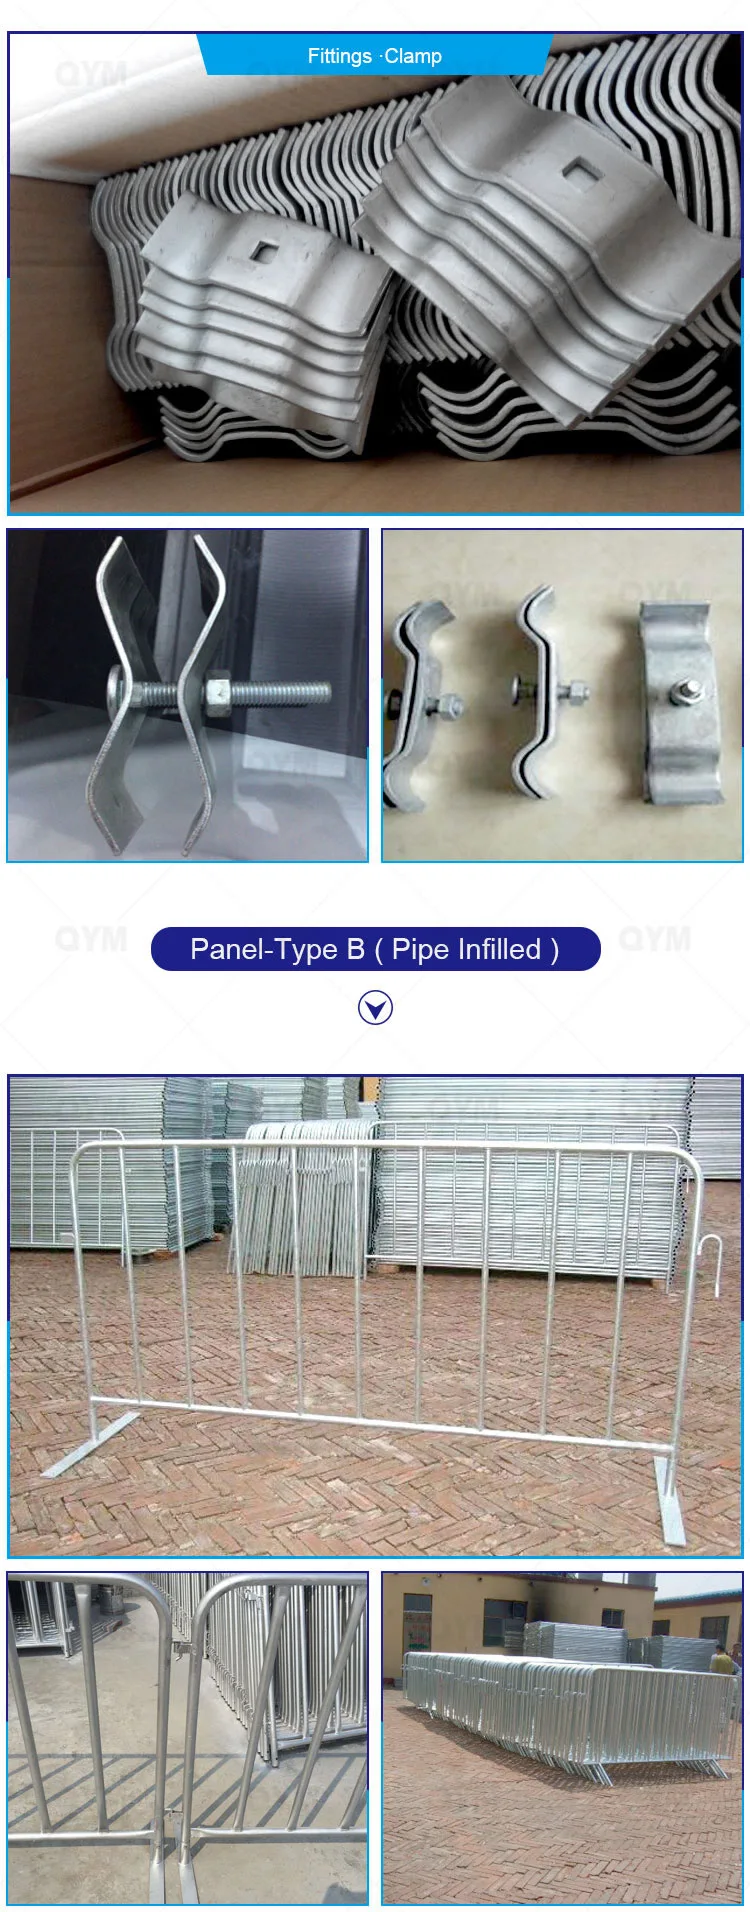 Temporary Swimming Pool Fence Galvanized Crowd Control Barrier Fence